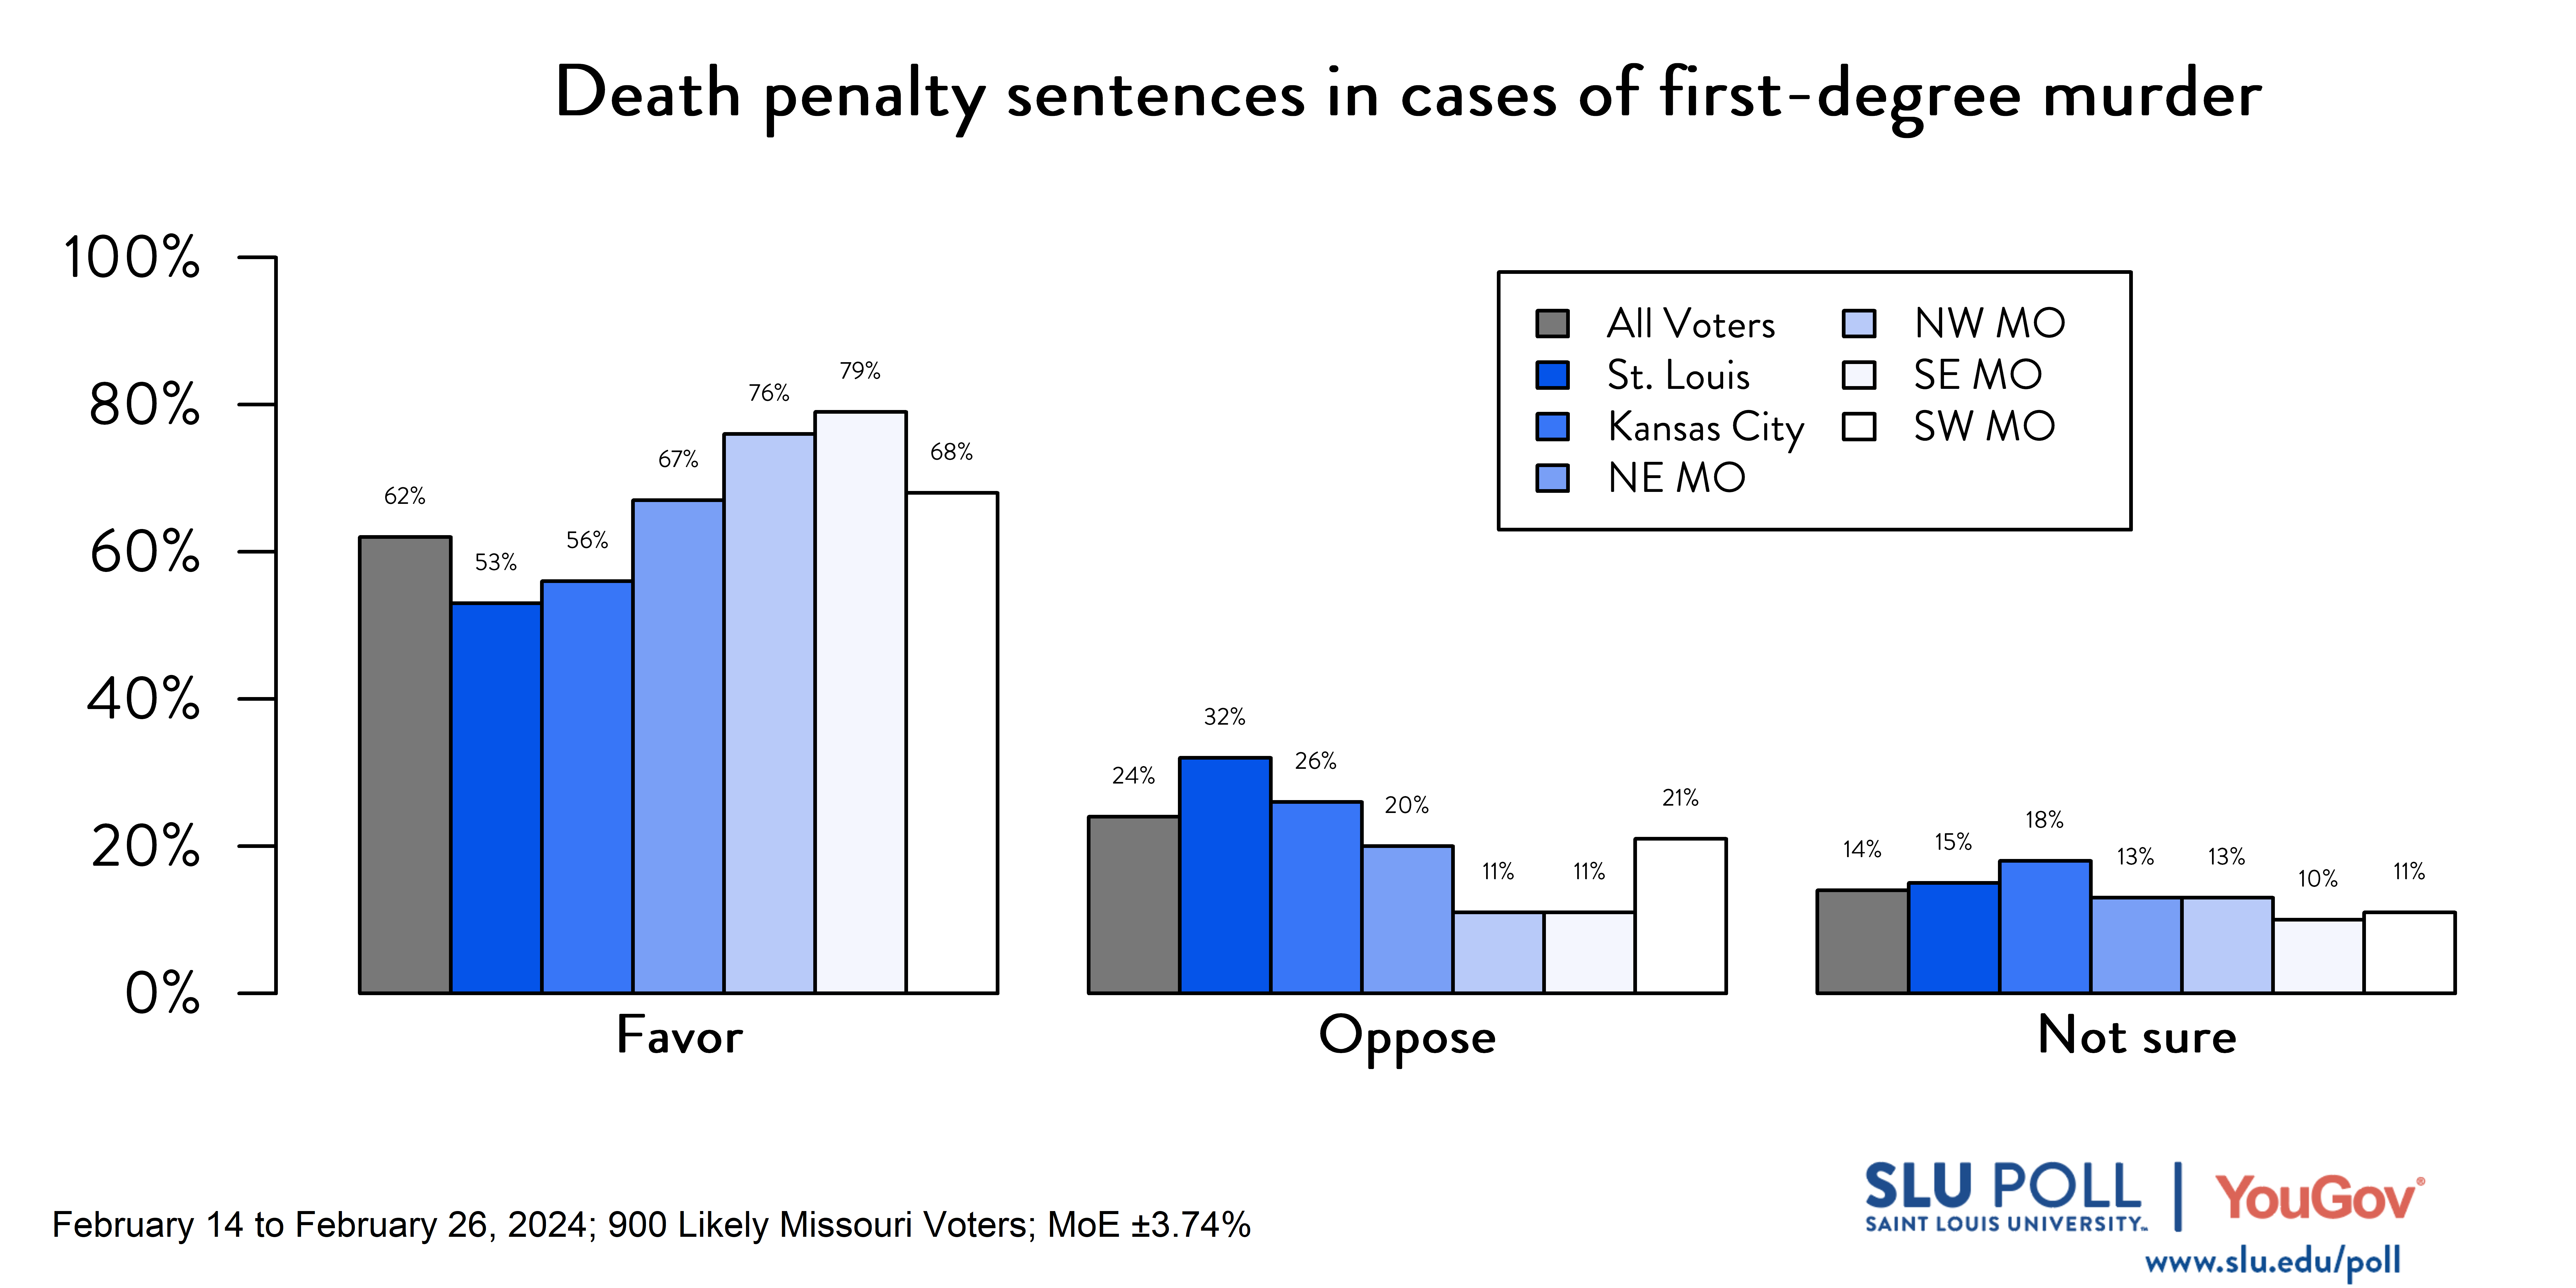 Bar graph of SLU/YouGov Poll result for death penalty by region question. Results in caption